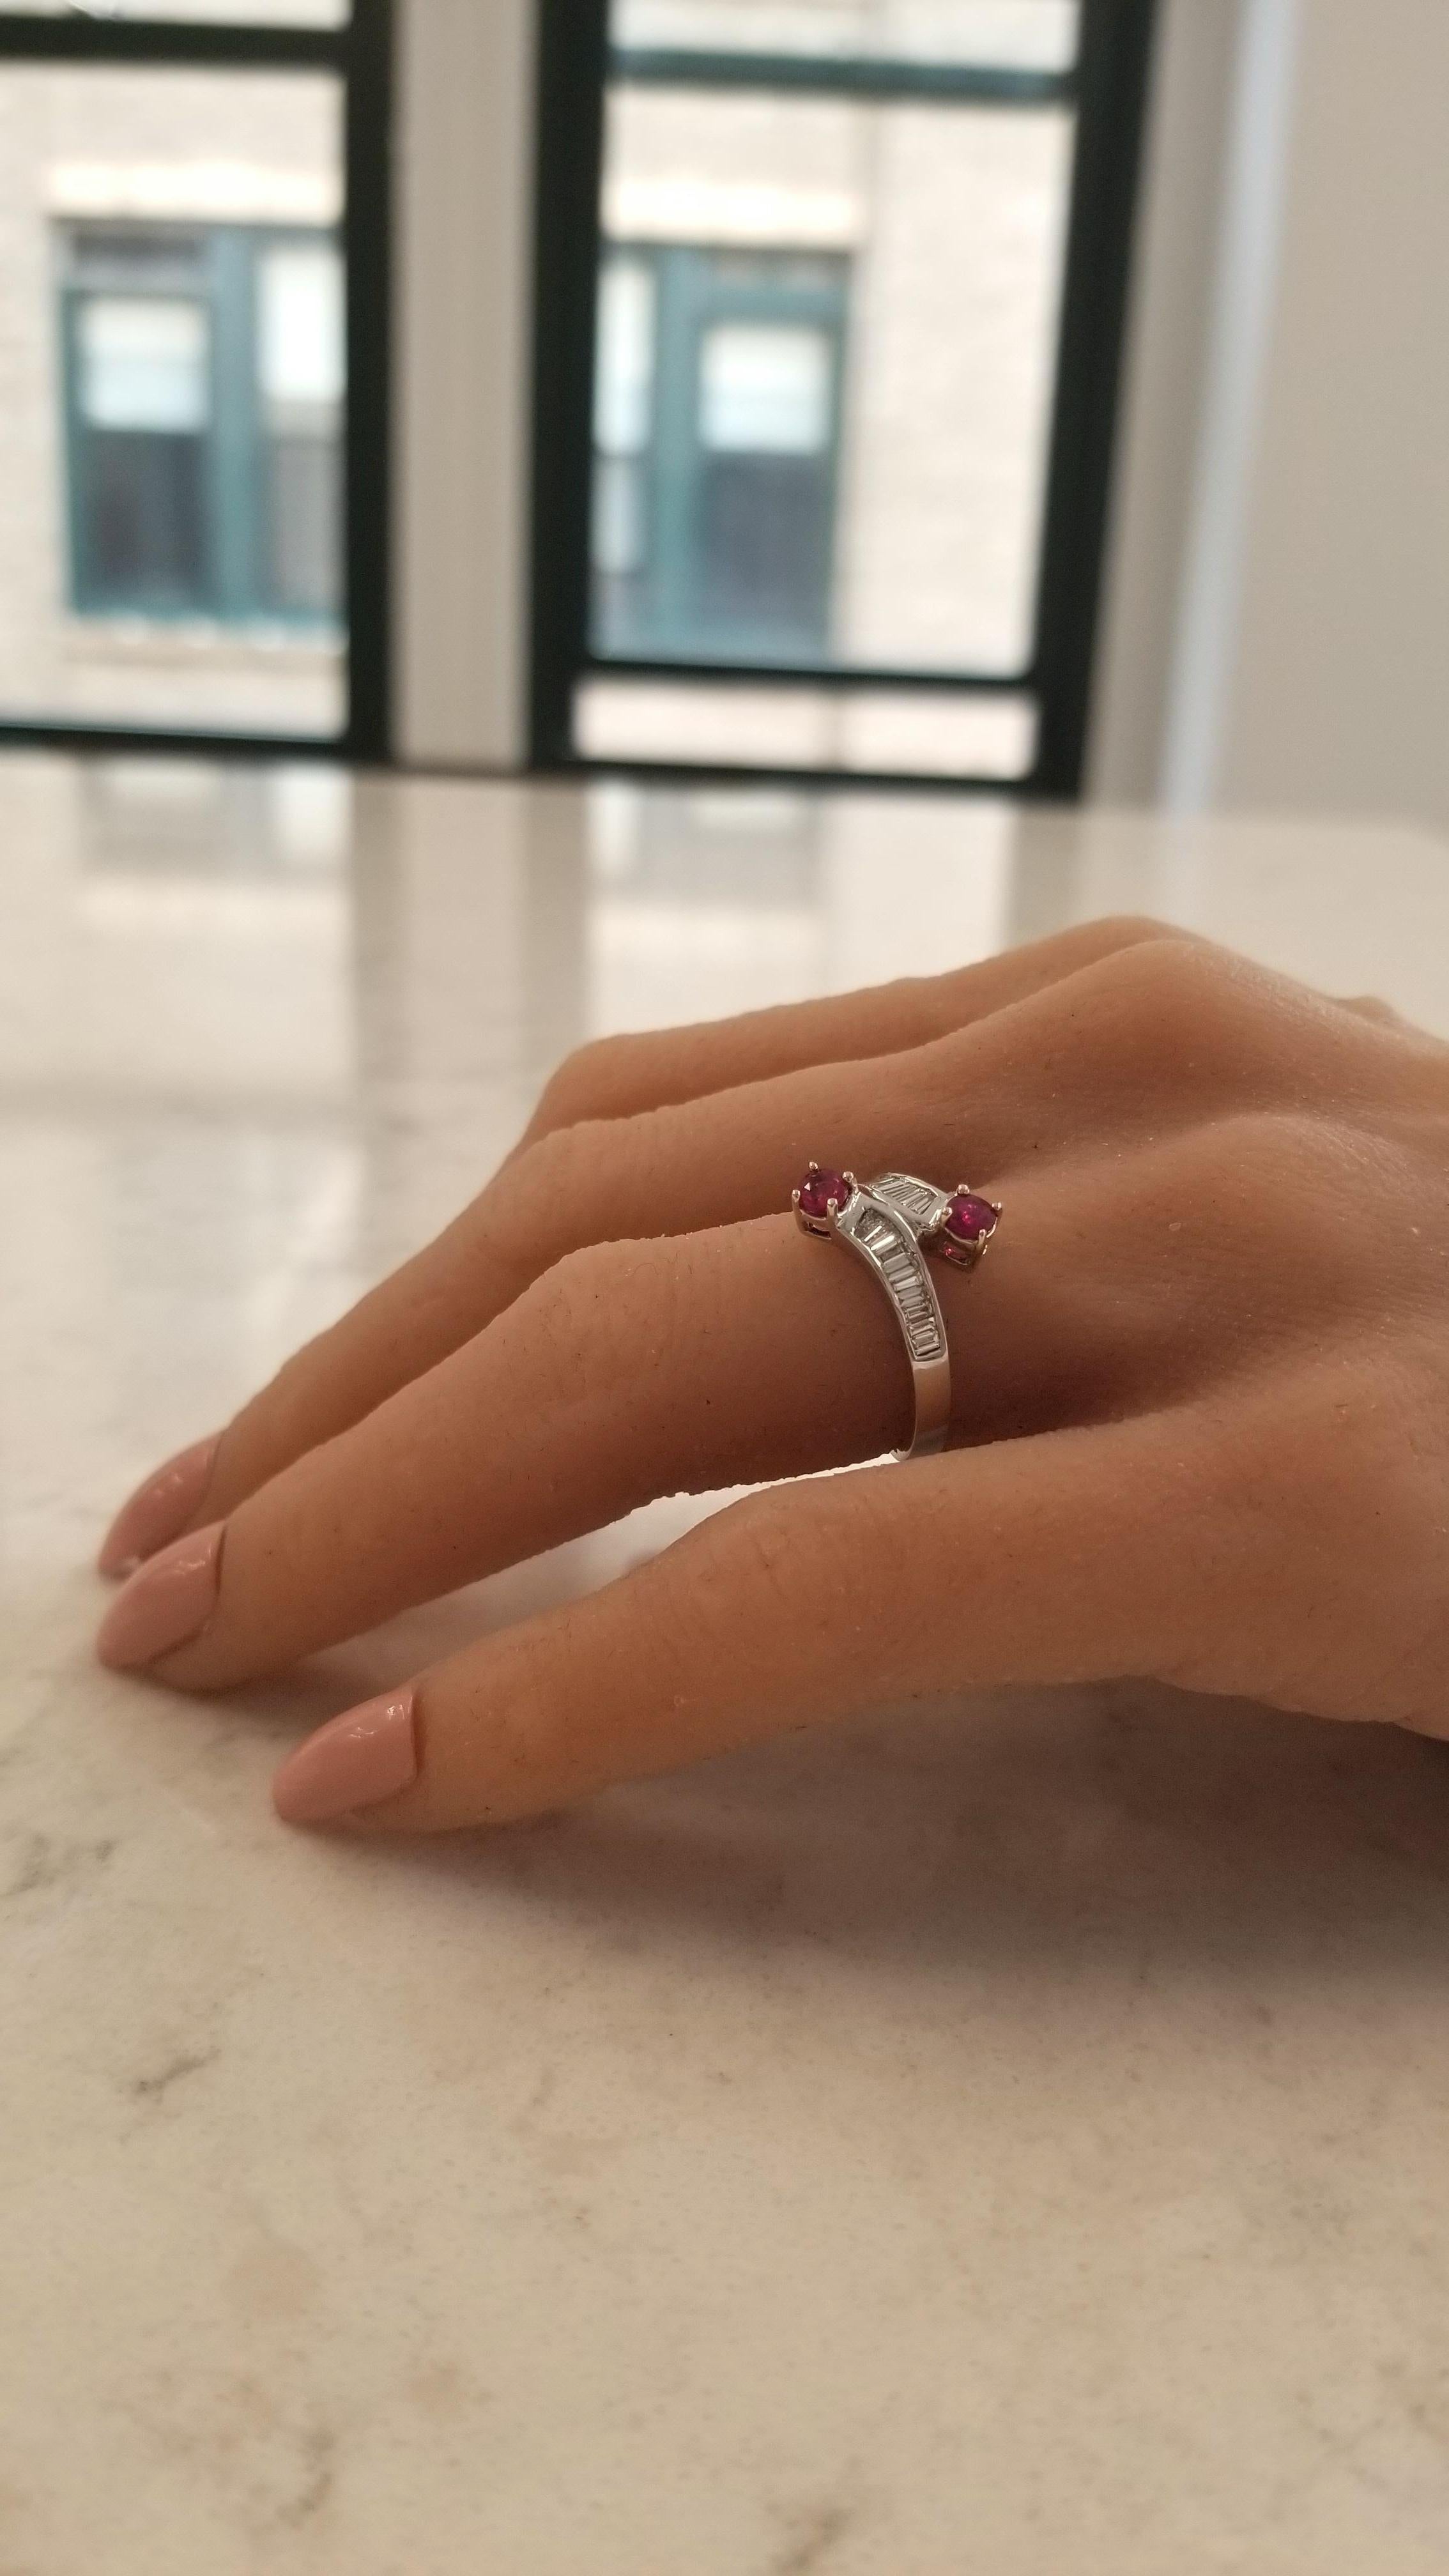 This custom made contemporary bypass fashion anniversary ring is finely crafted in brightly polished 14 karat white gold and features 0.55 carats of rubies that are round cut and yellow gold prong set in a 2-stone setting. Shimmering baguette cut